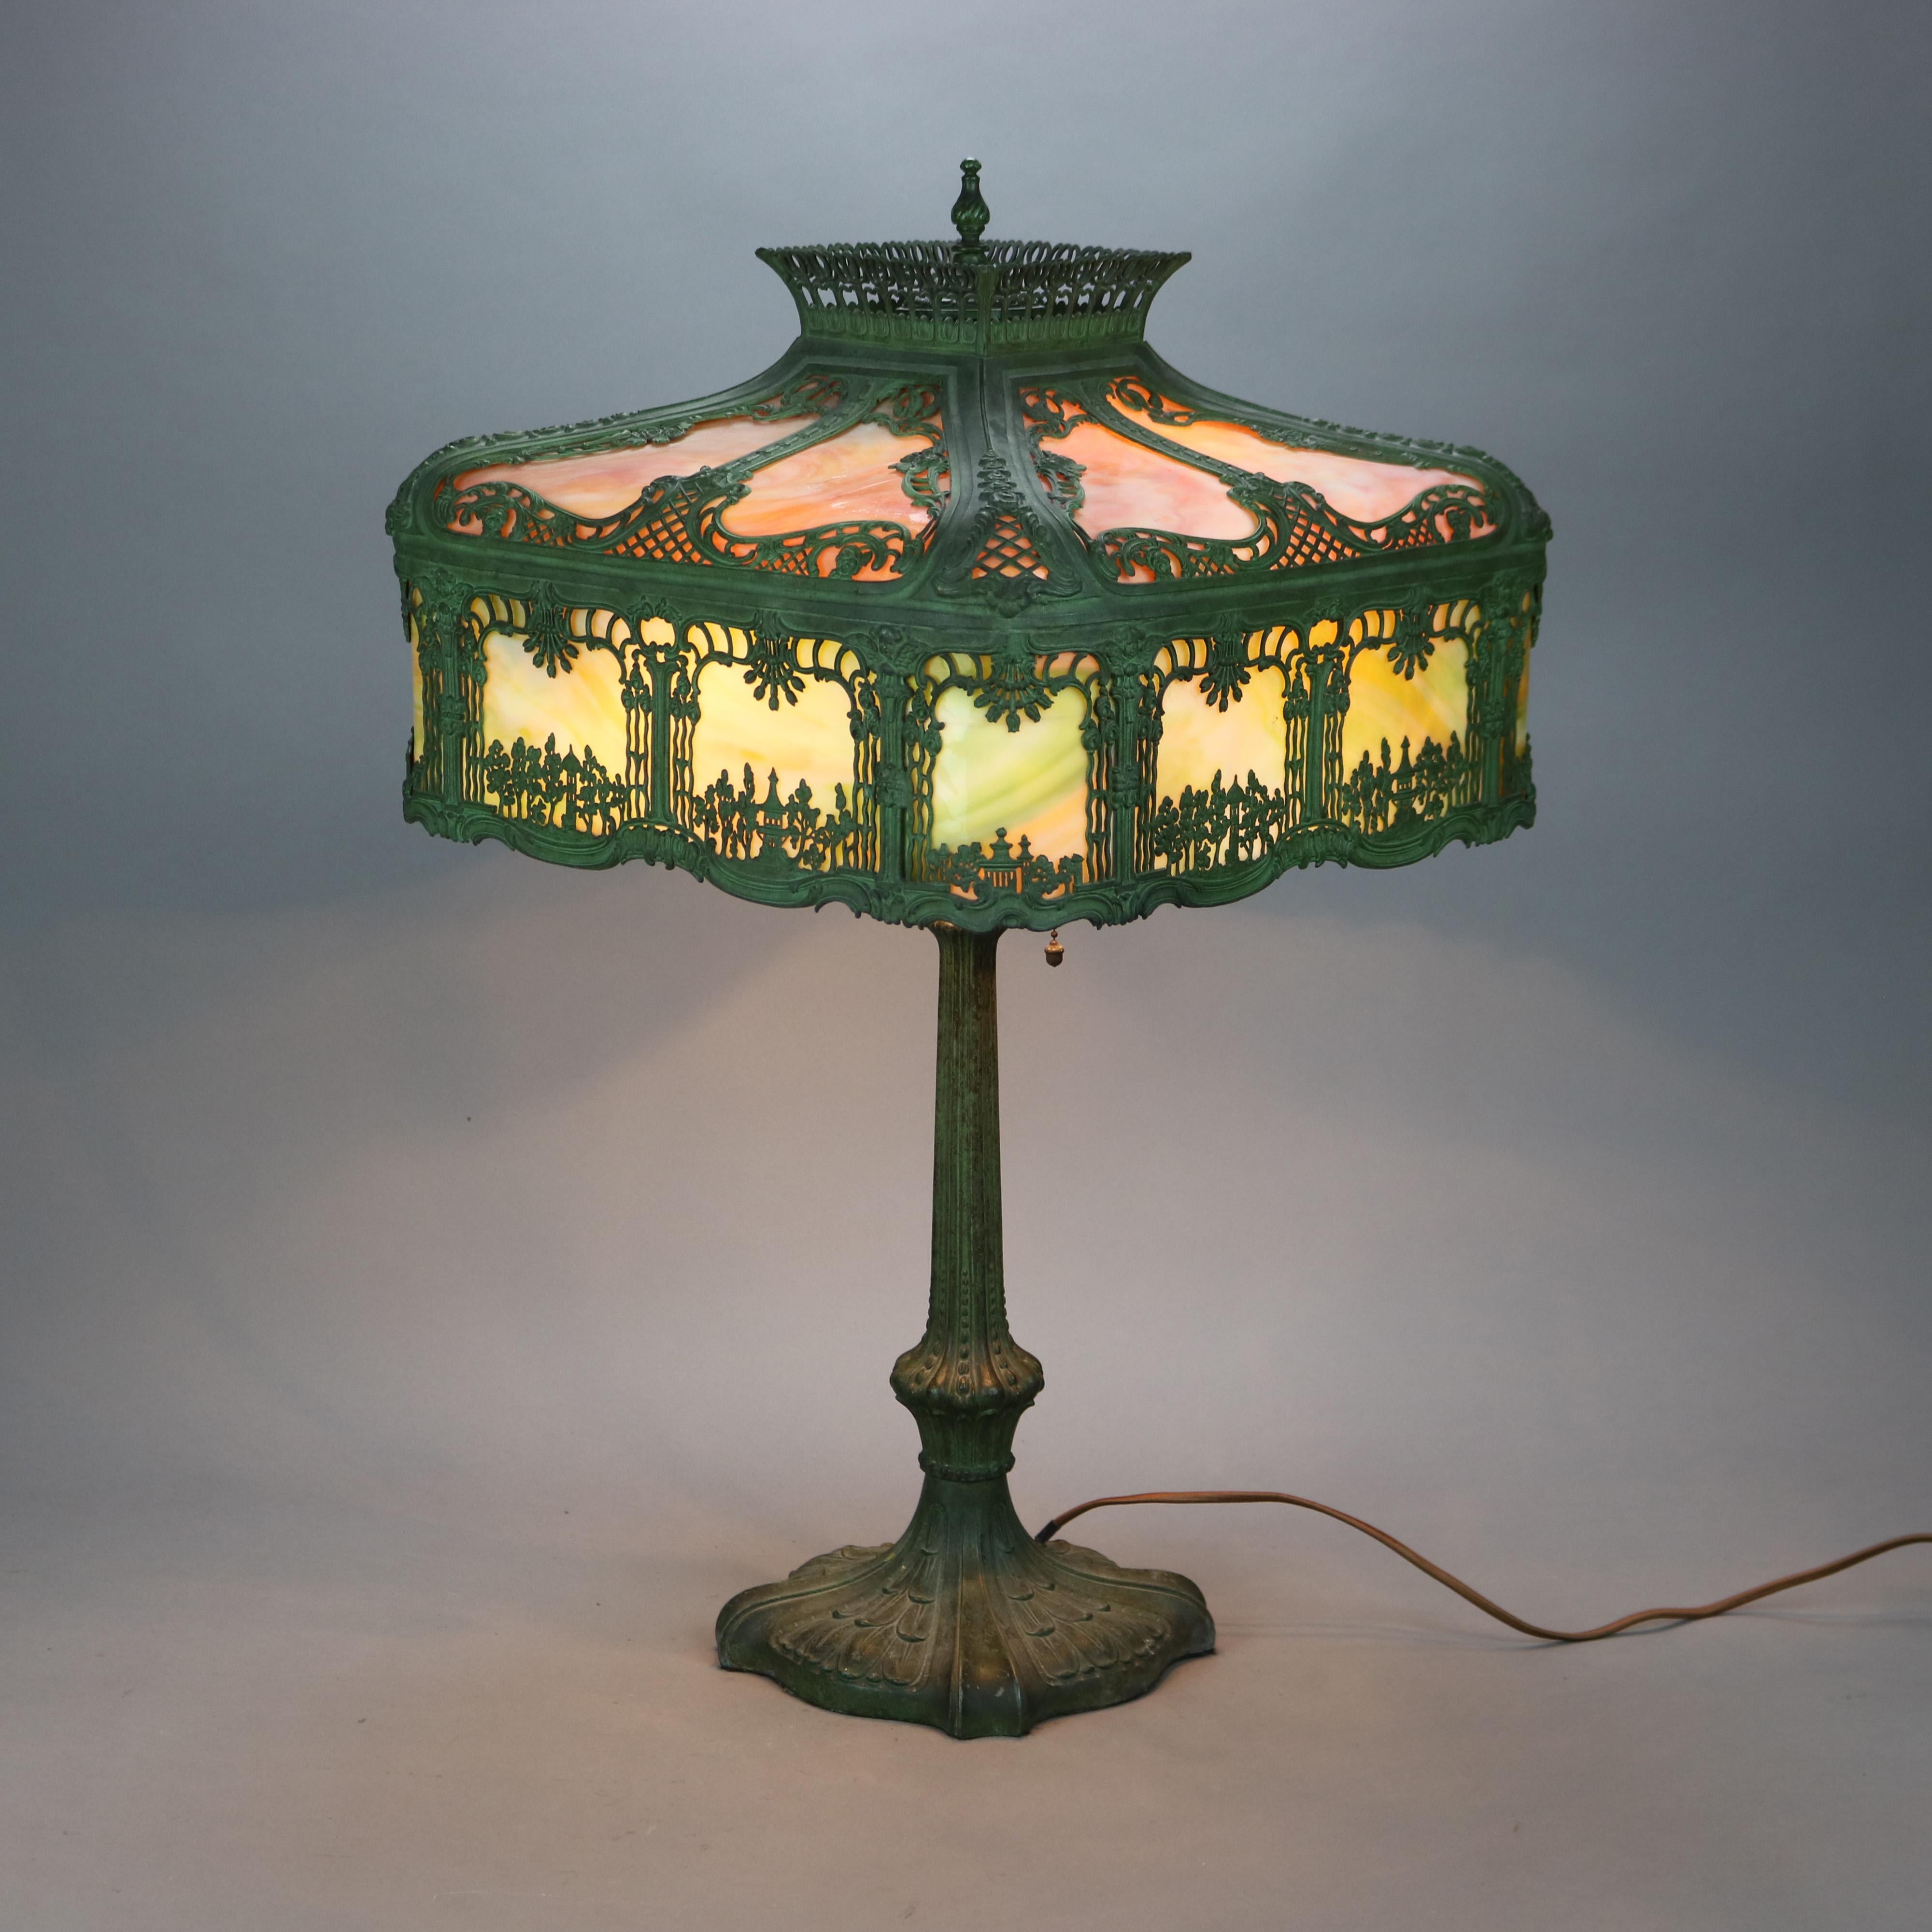 An antique Arts & Crafts table lamp in manner of Bradley and Hubbard offers pagoda style cast filigree shade with landscape scene having pagodas over cast triple socket base, c1920

Measures - 27.5'' H x 16'' W x 16'' D.